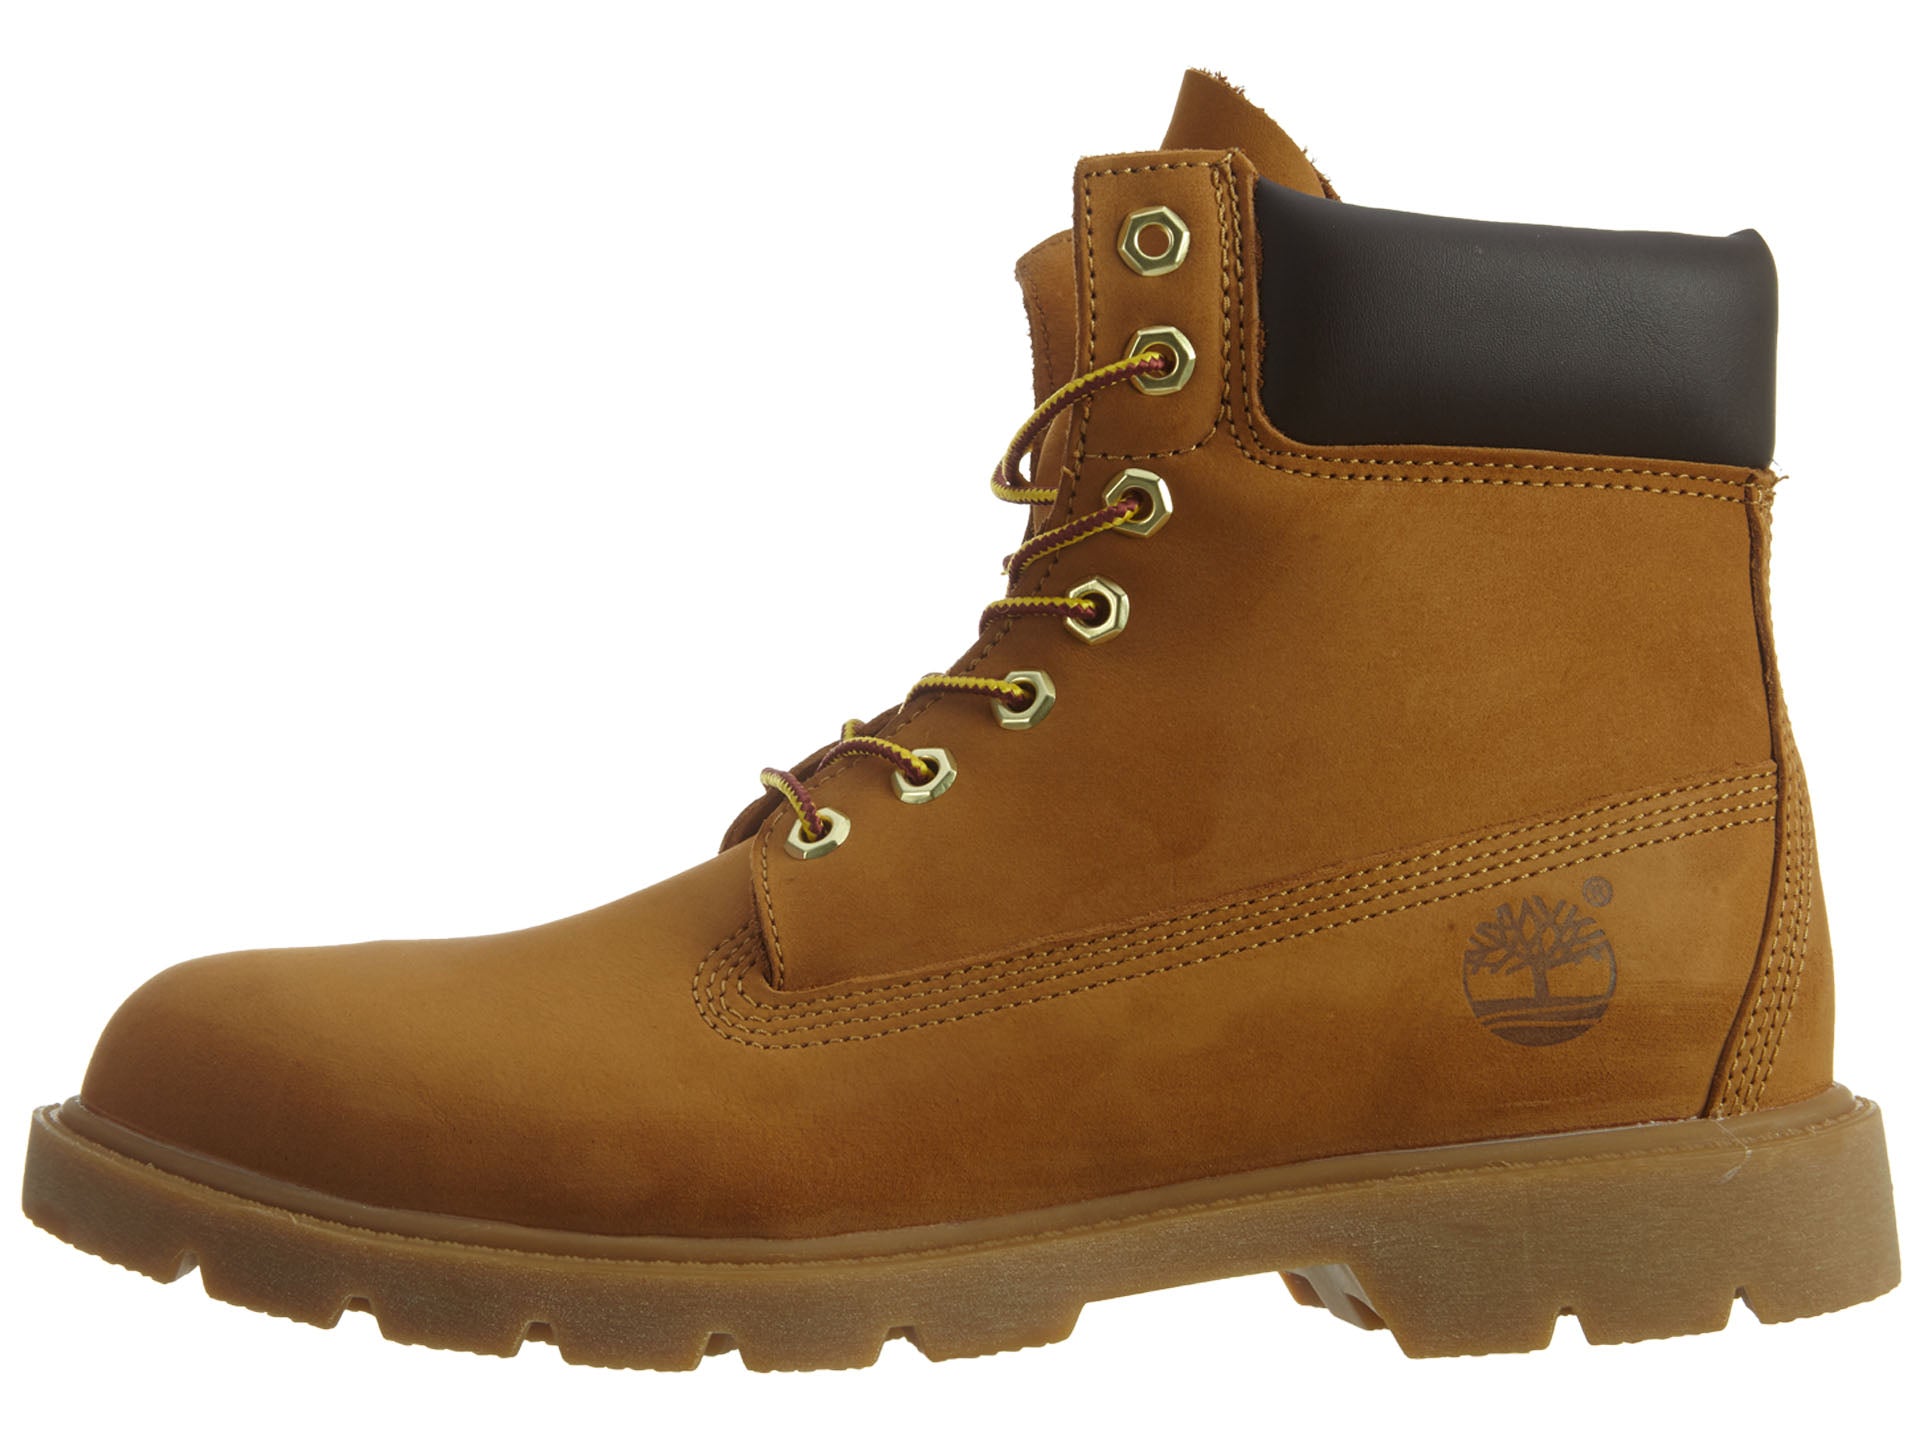 TIMBERLAND 6 IN BASIC BOOT MENS STYLE # 18094